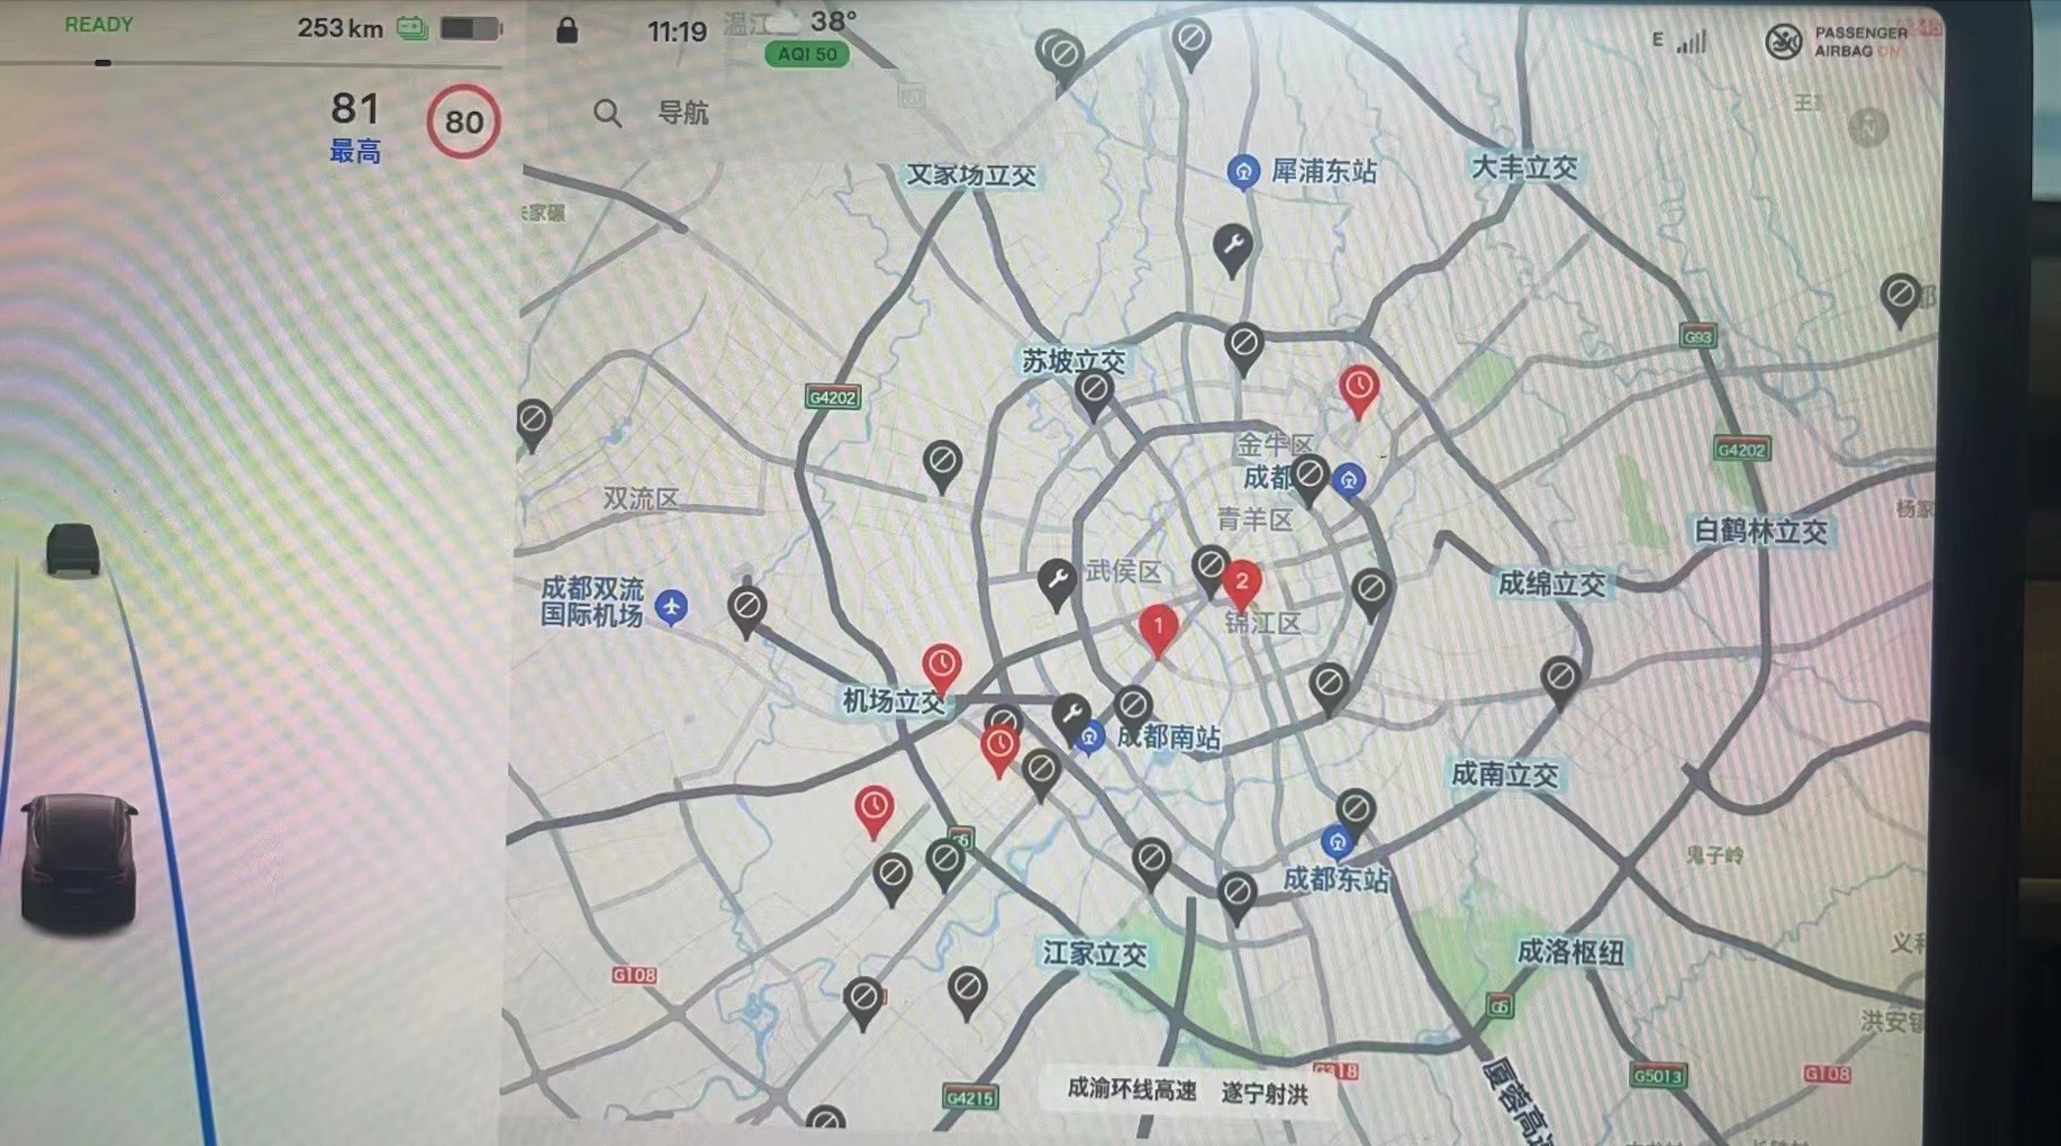 A screenshot in a Tesla vehicle shows that only two of the 31 nearby Tesla Superchargers are available.